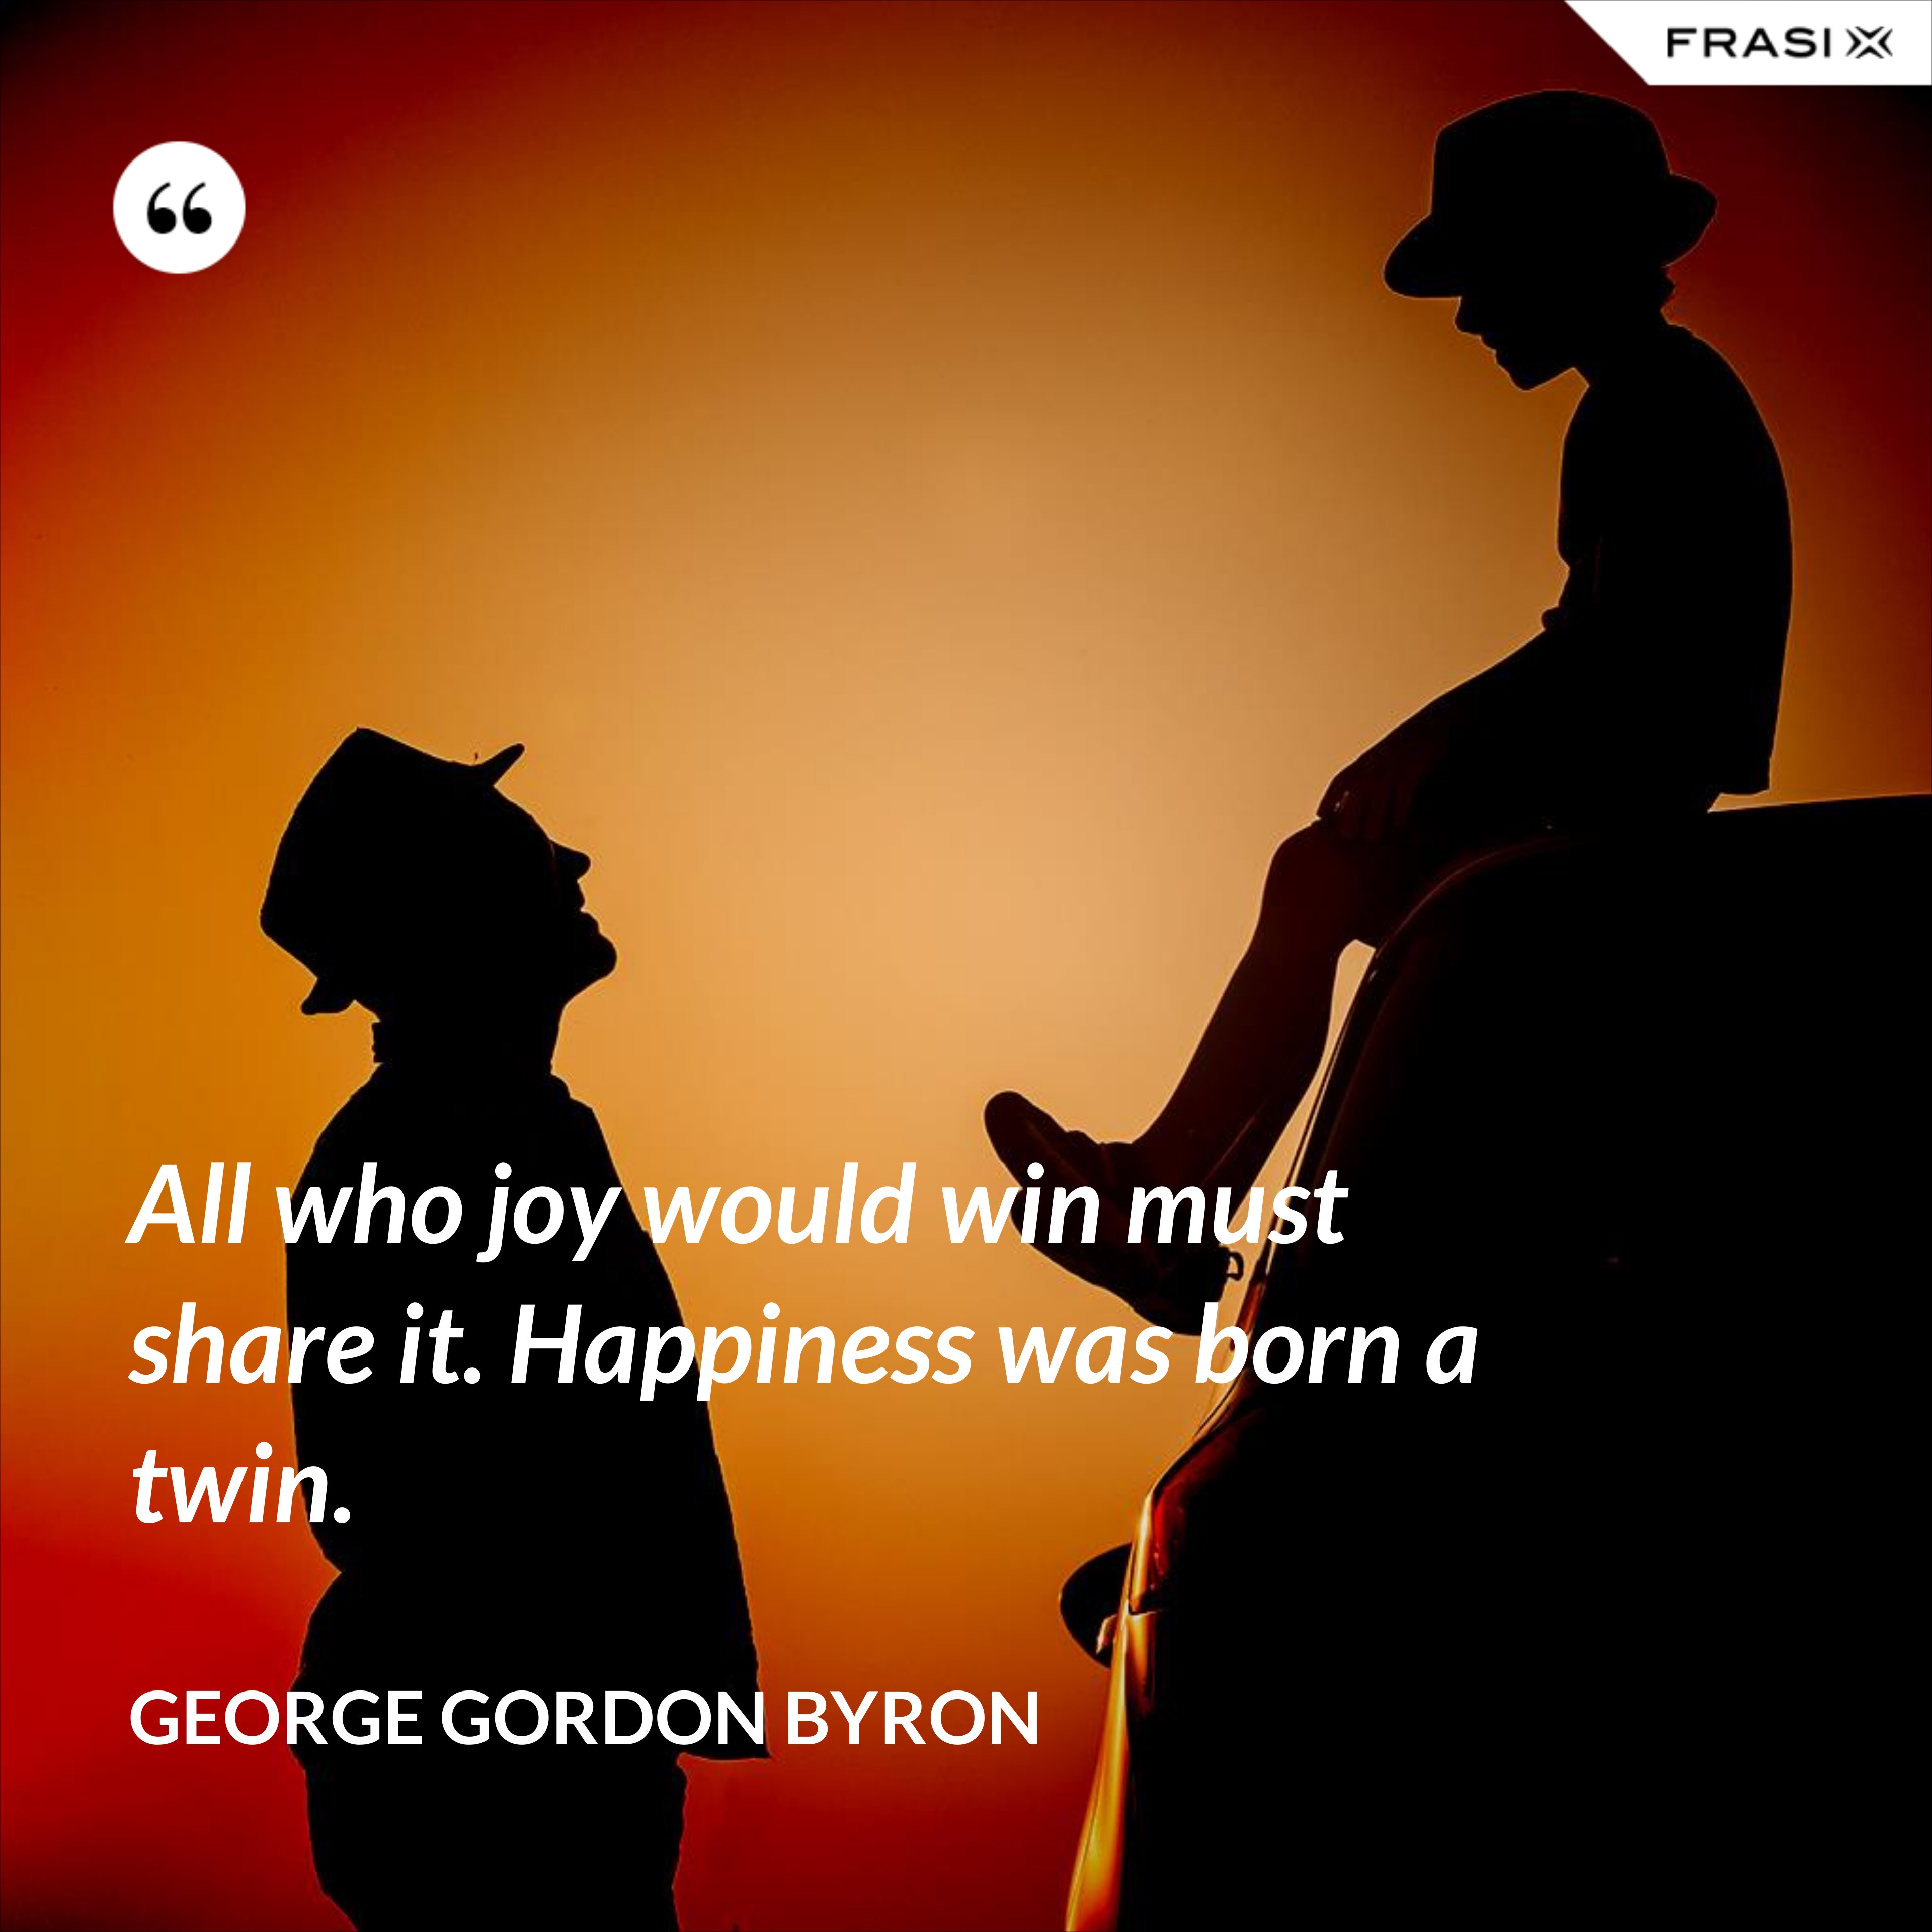 All who joy would win must share it. Happiness was born a twin. - George Gordon Byron